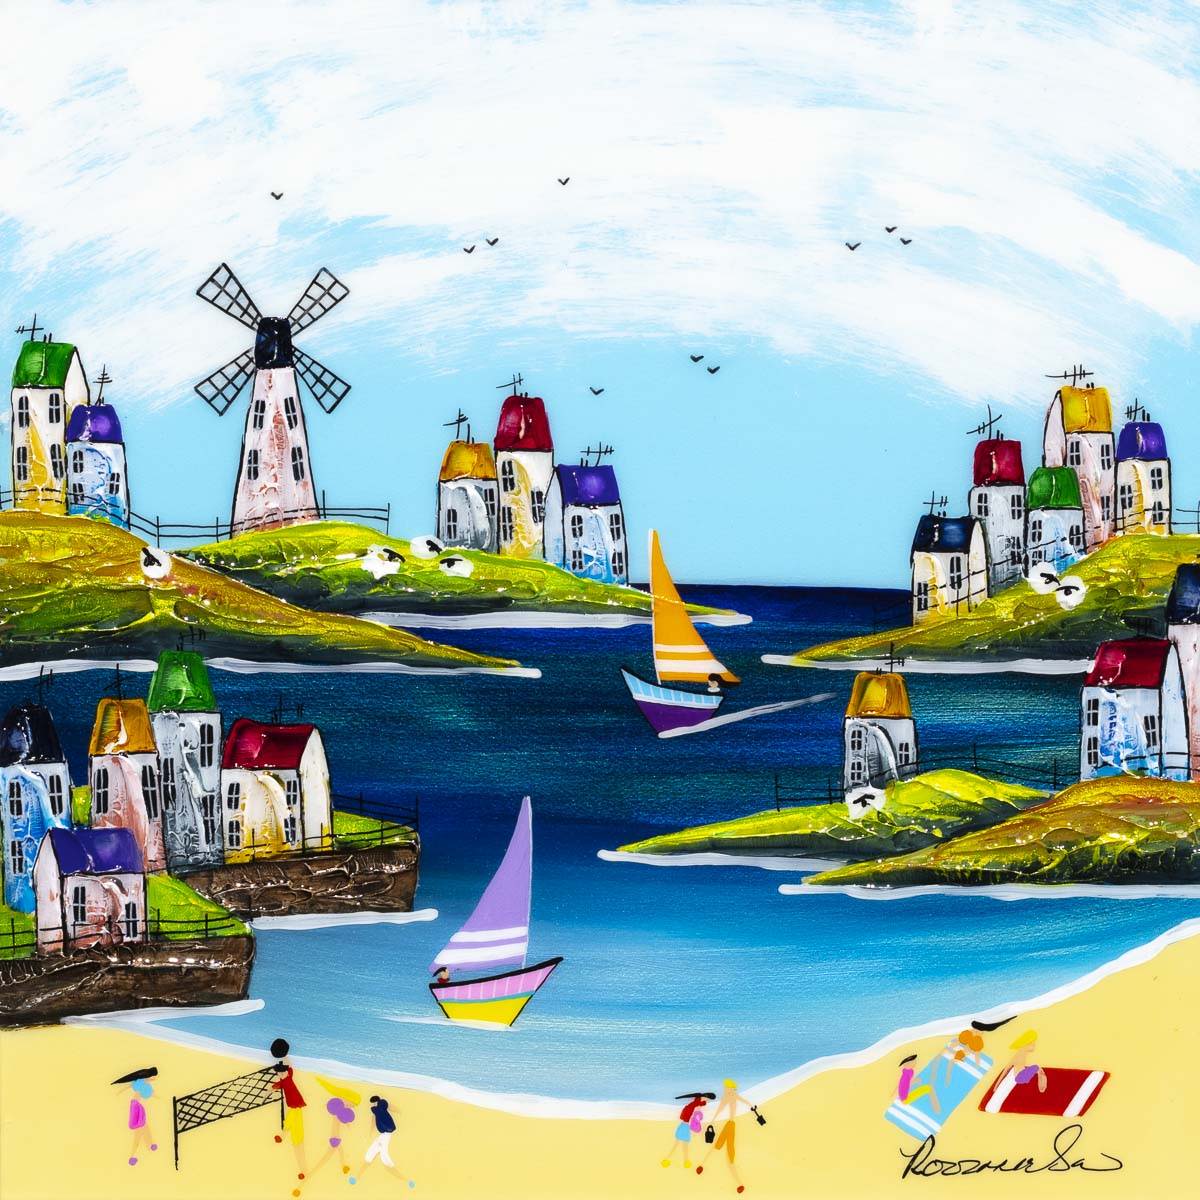 Seaside painting looking at a tranquil bay with a windmill, houses and people at the bottom on the beach.